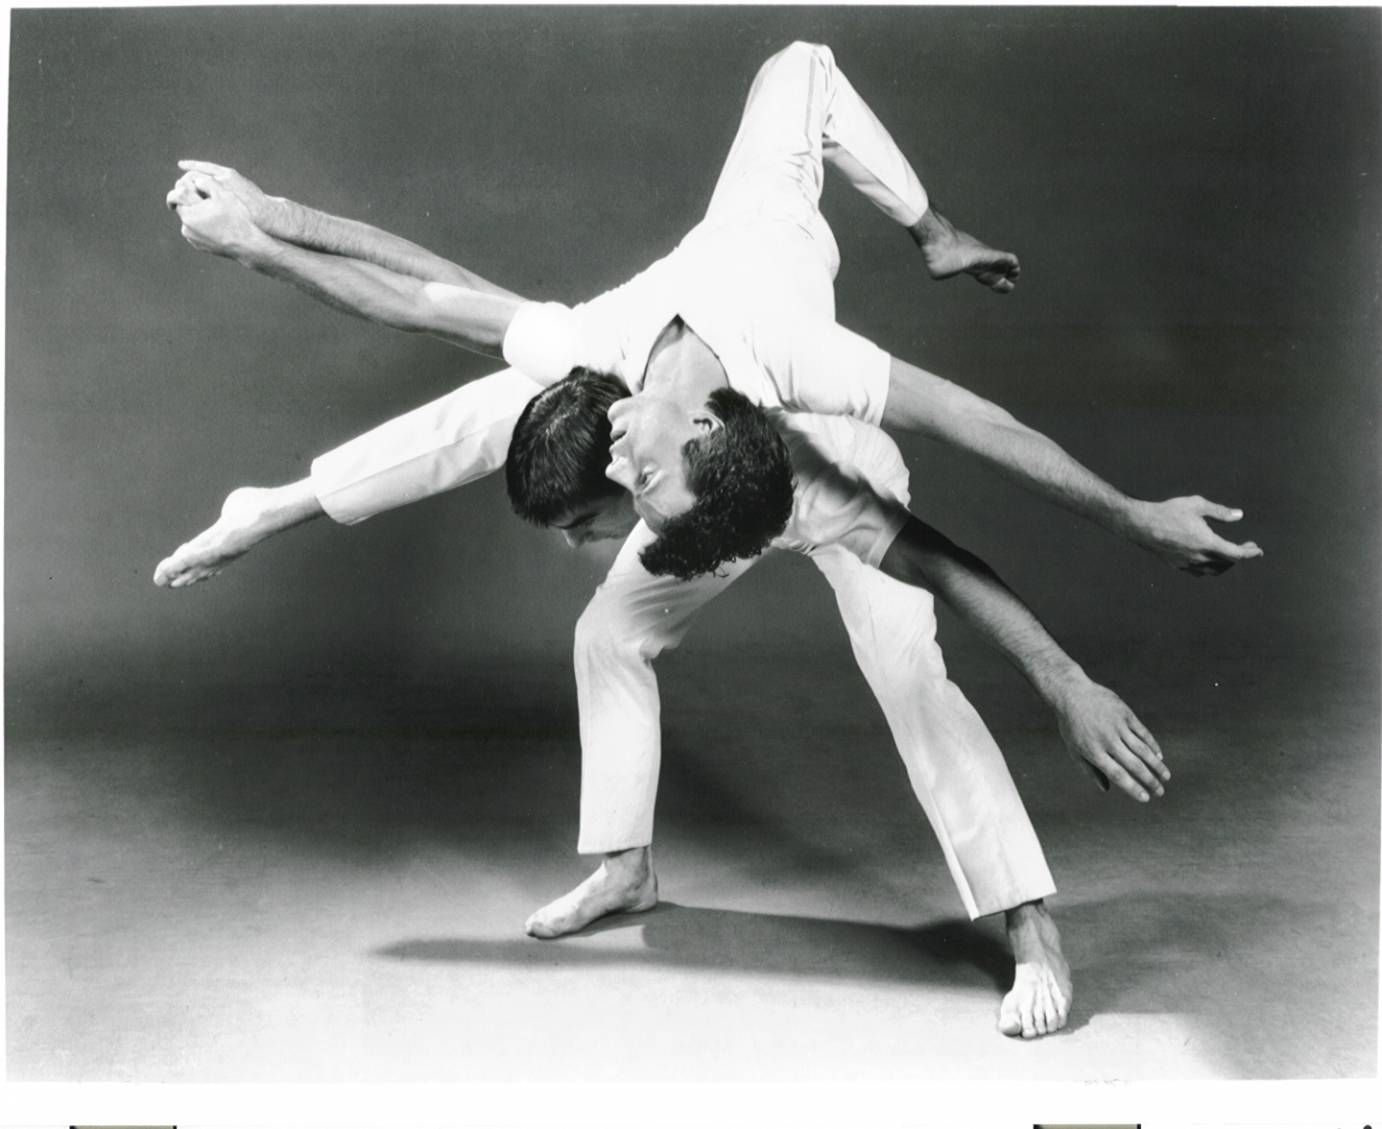 One man rolls over the back of another man, their arms gracefully extended.